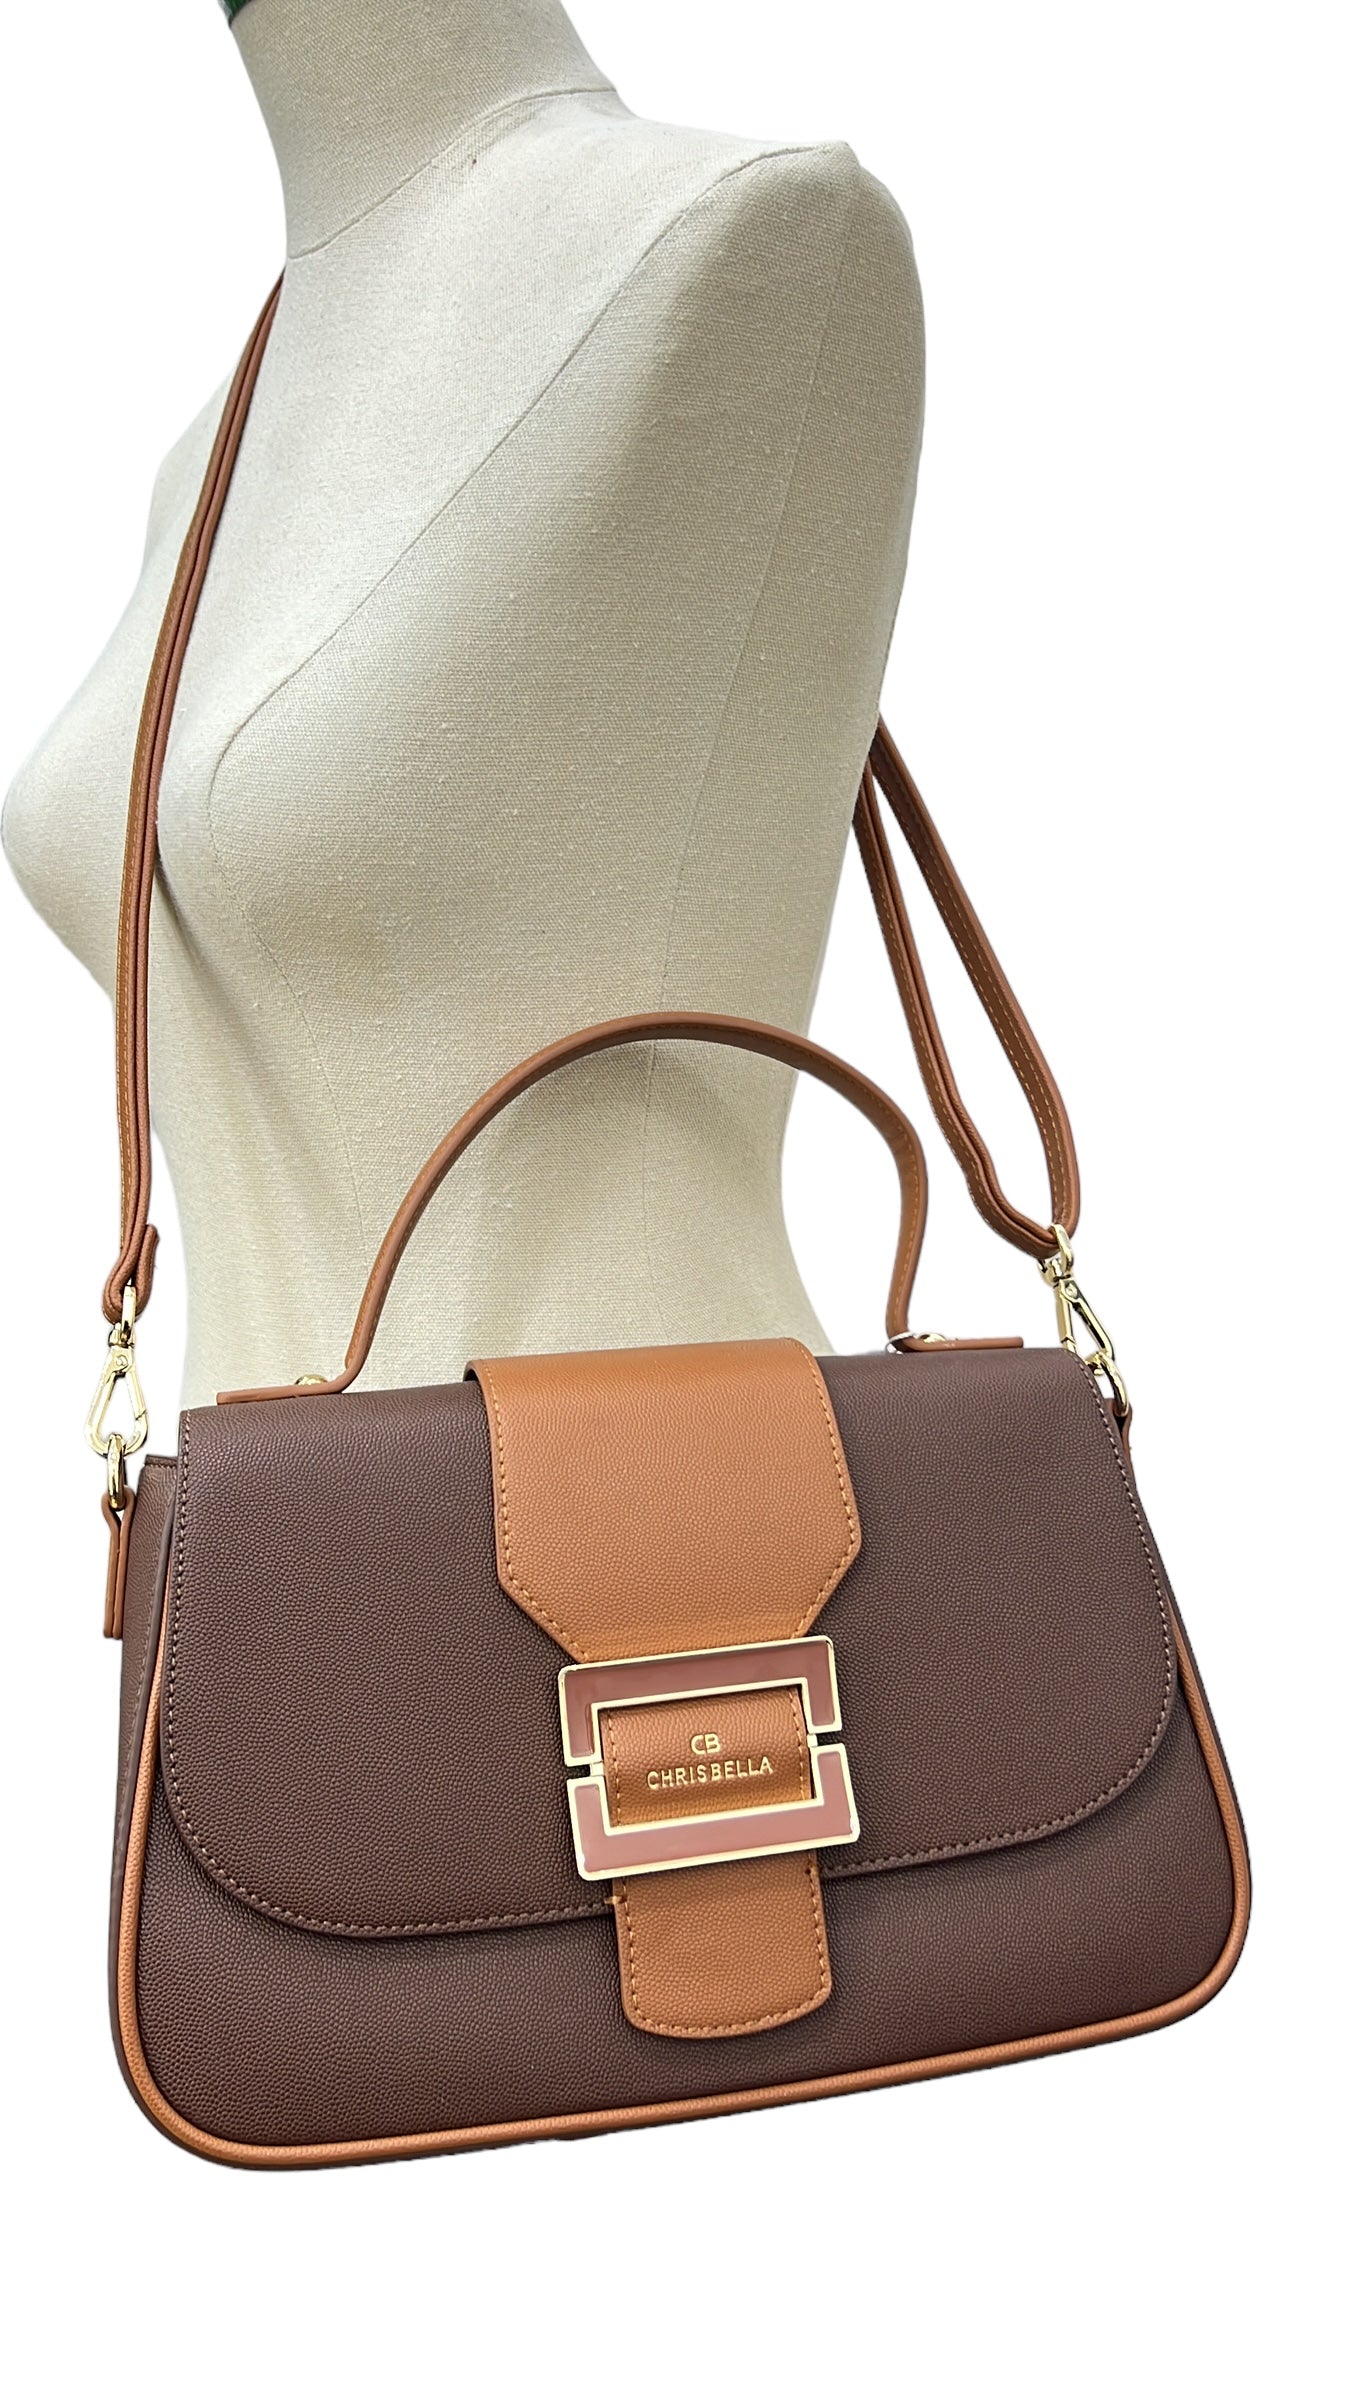 CHRISBELLA TEXTURED BUCKLE DETAIL TWO-TONE BAG IN COFFEE